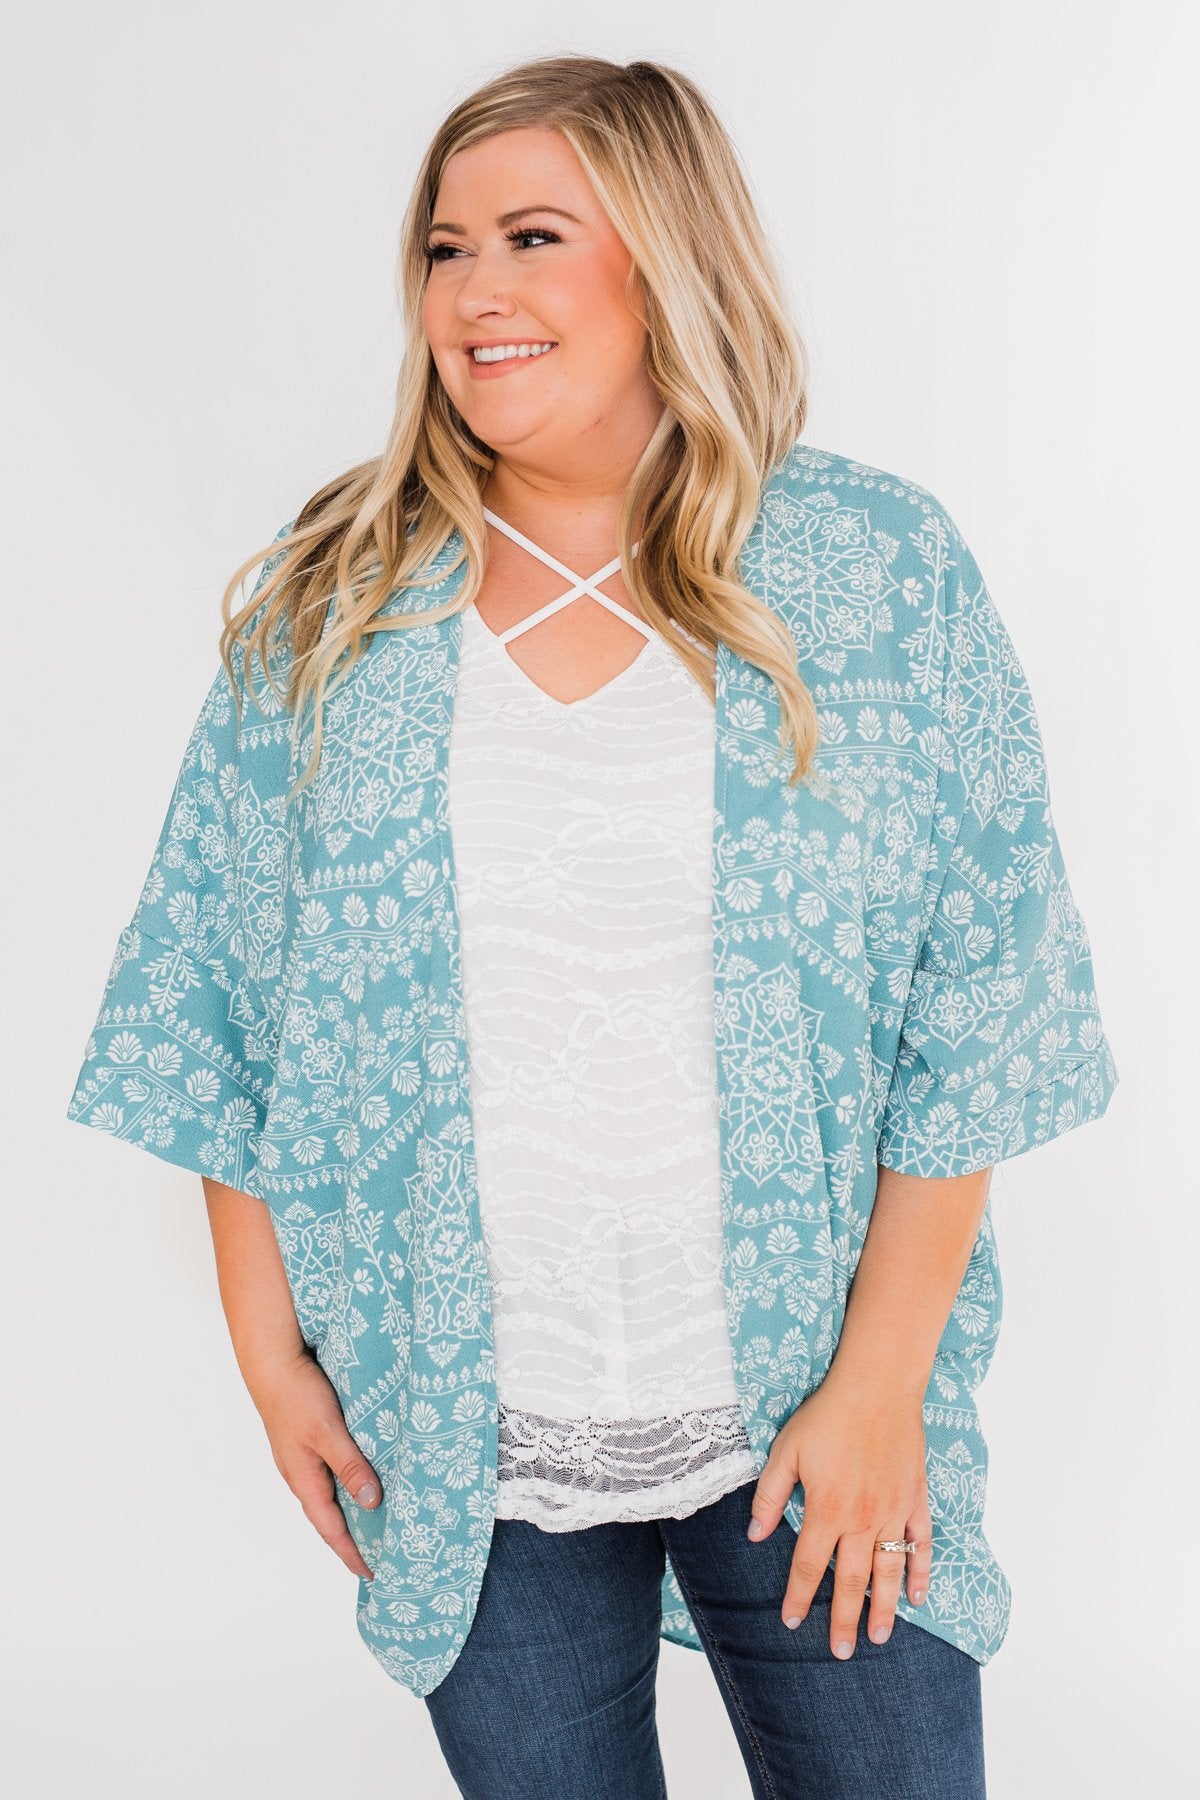 Catching The Wind Kimono- Dusty Blue – The Pulse Boutique